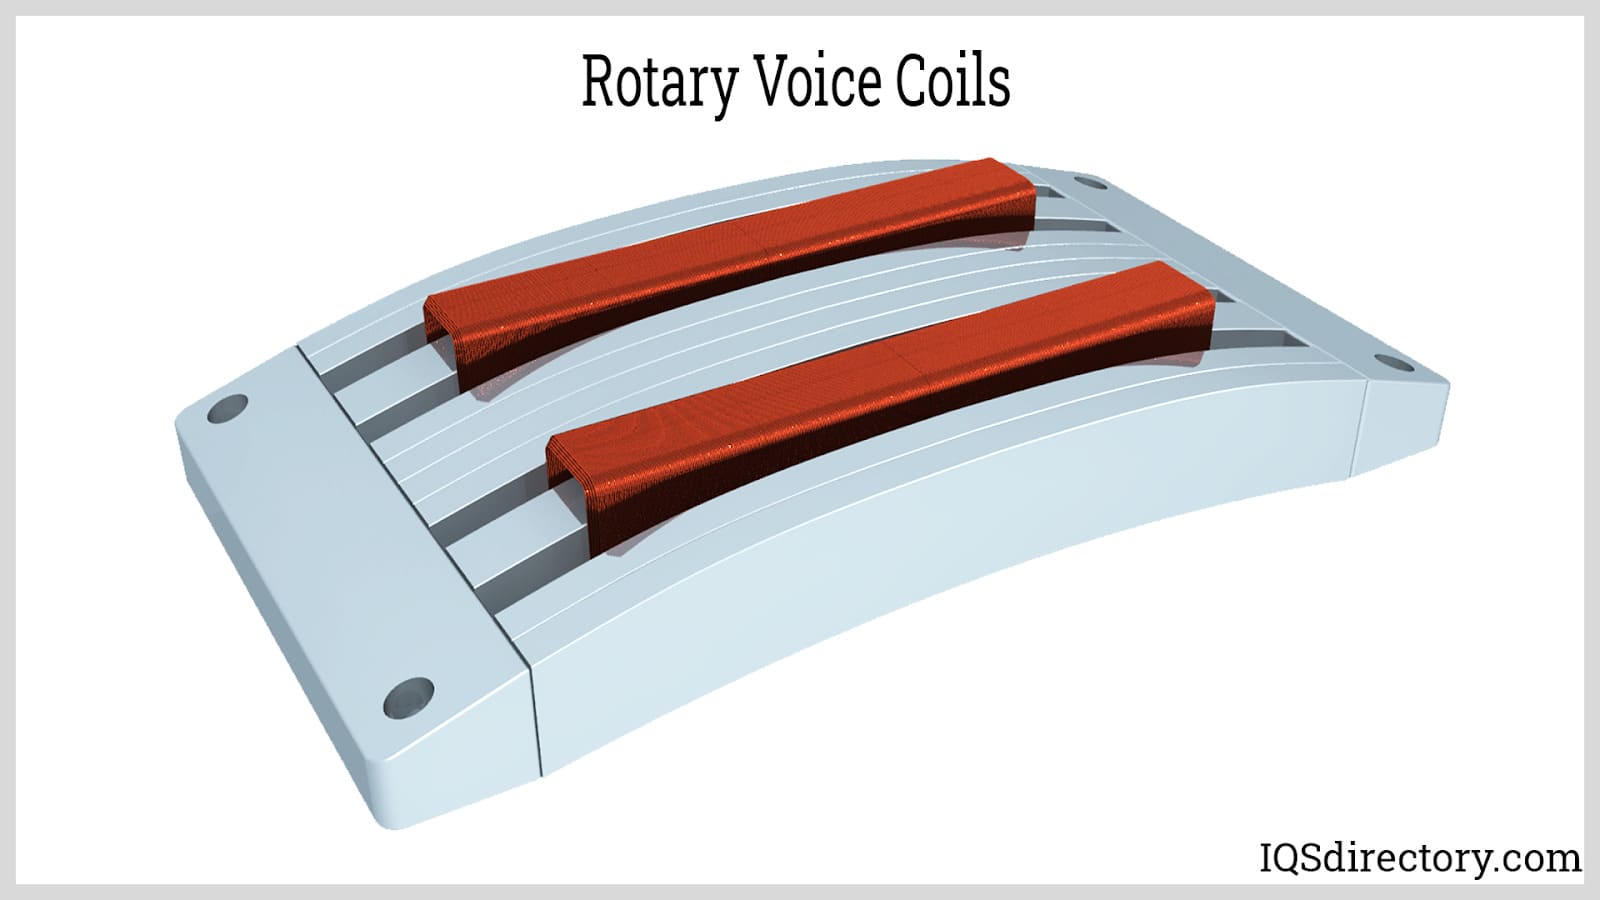 Rotary Voice Coils